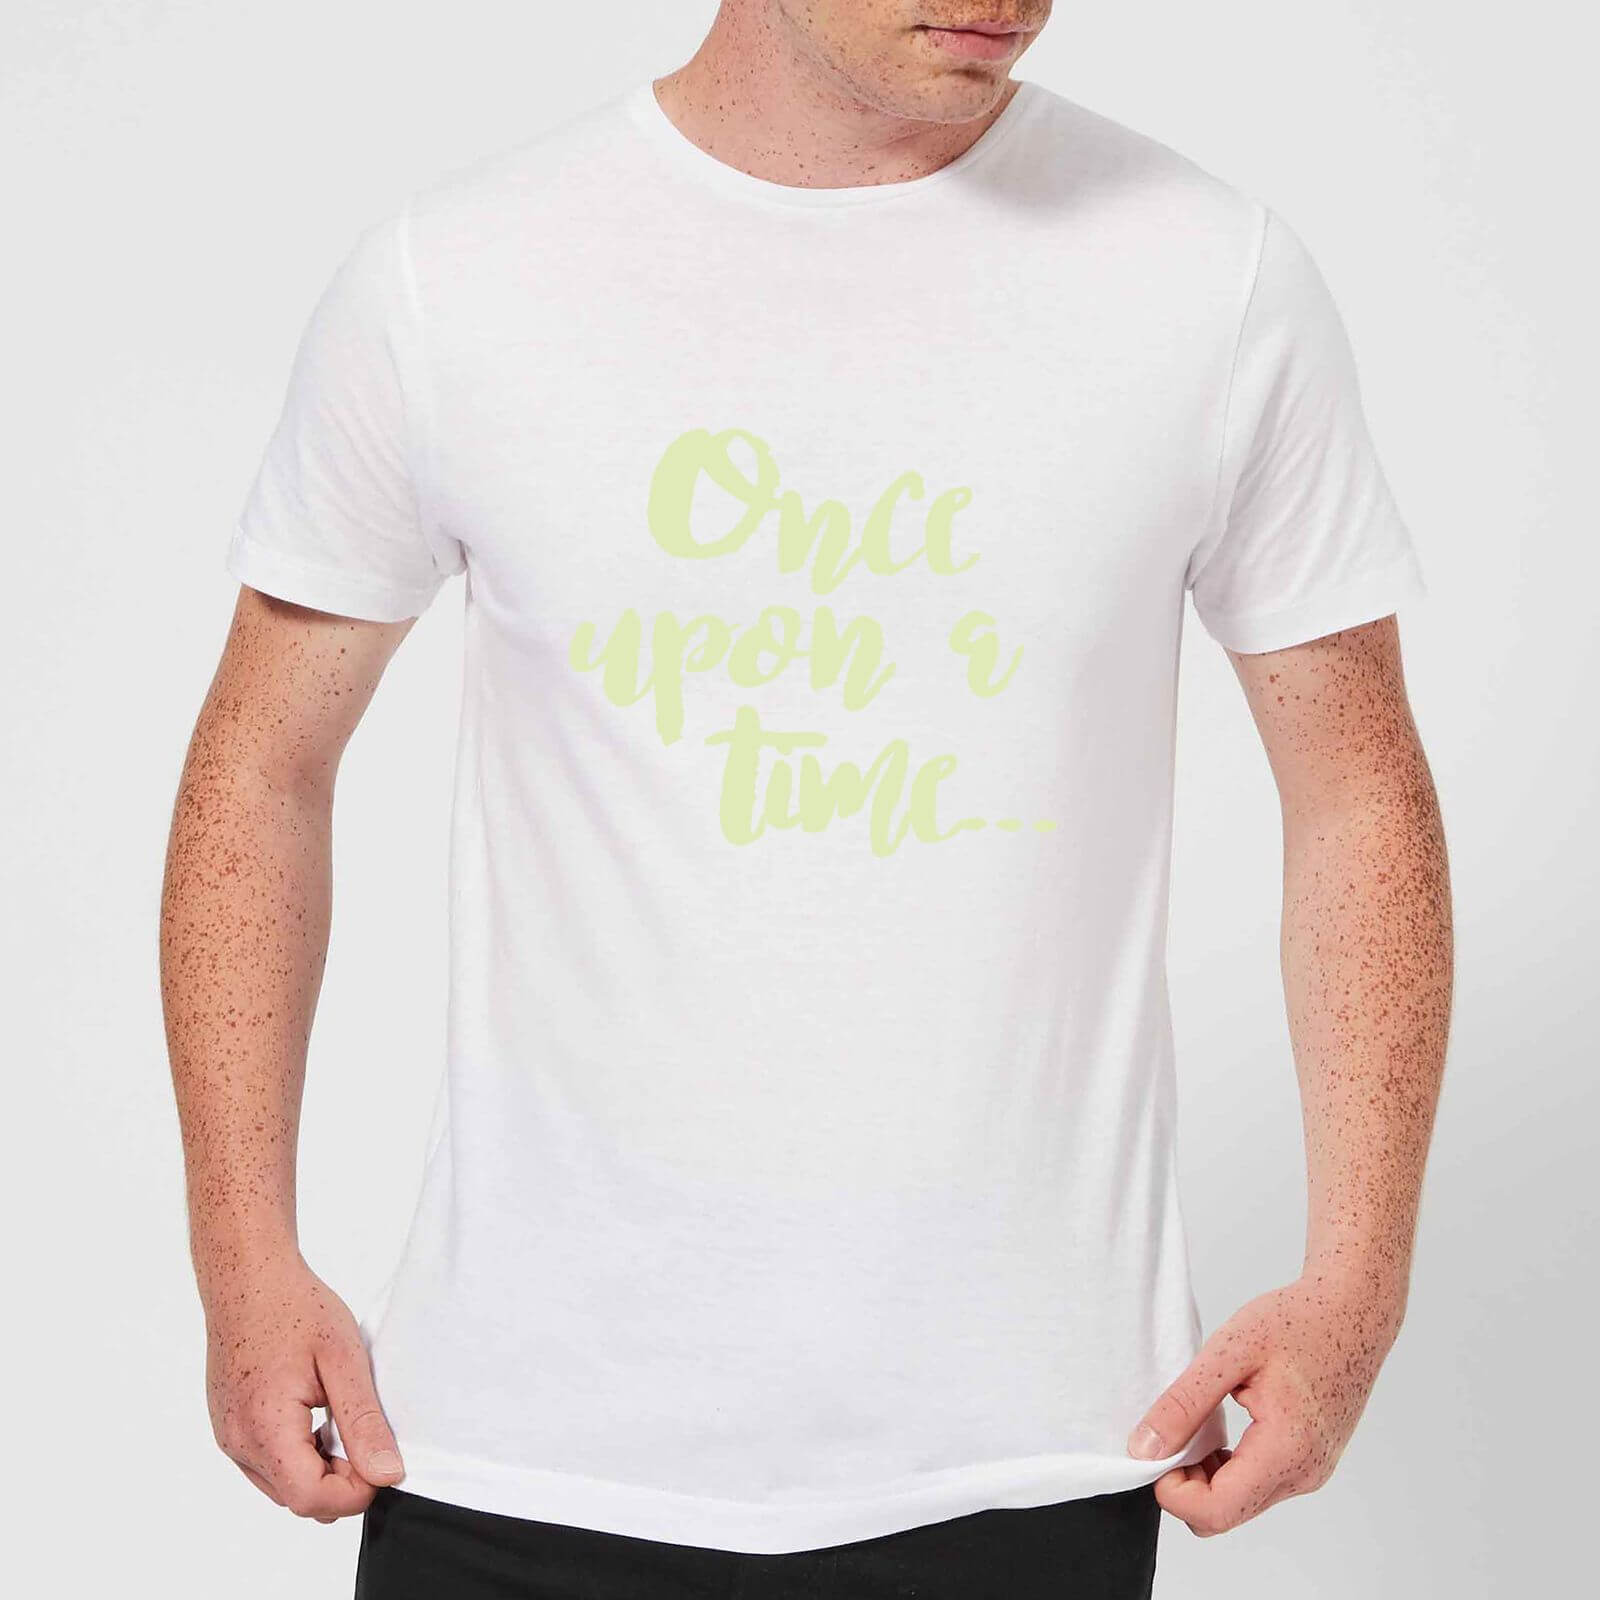 Once Upon A Time Men's T-Shirt - White - L - White